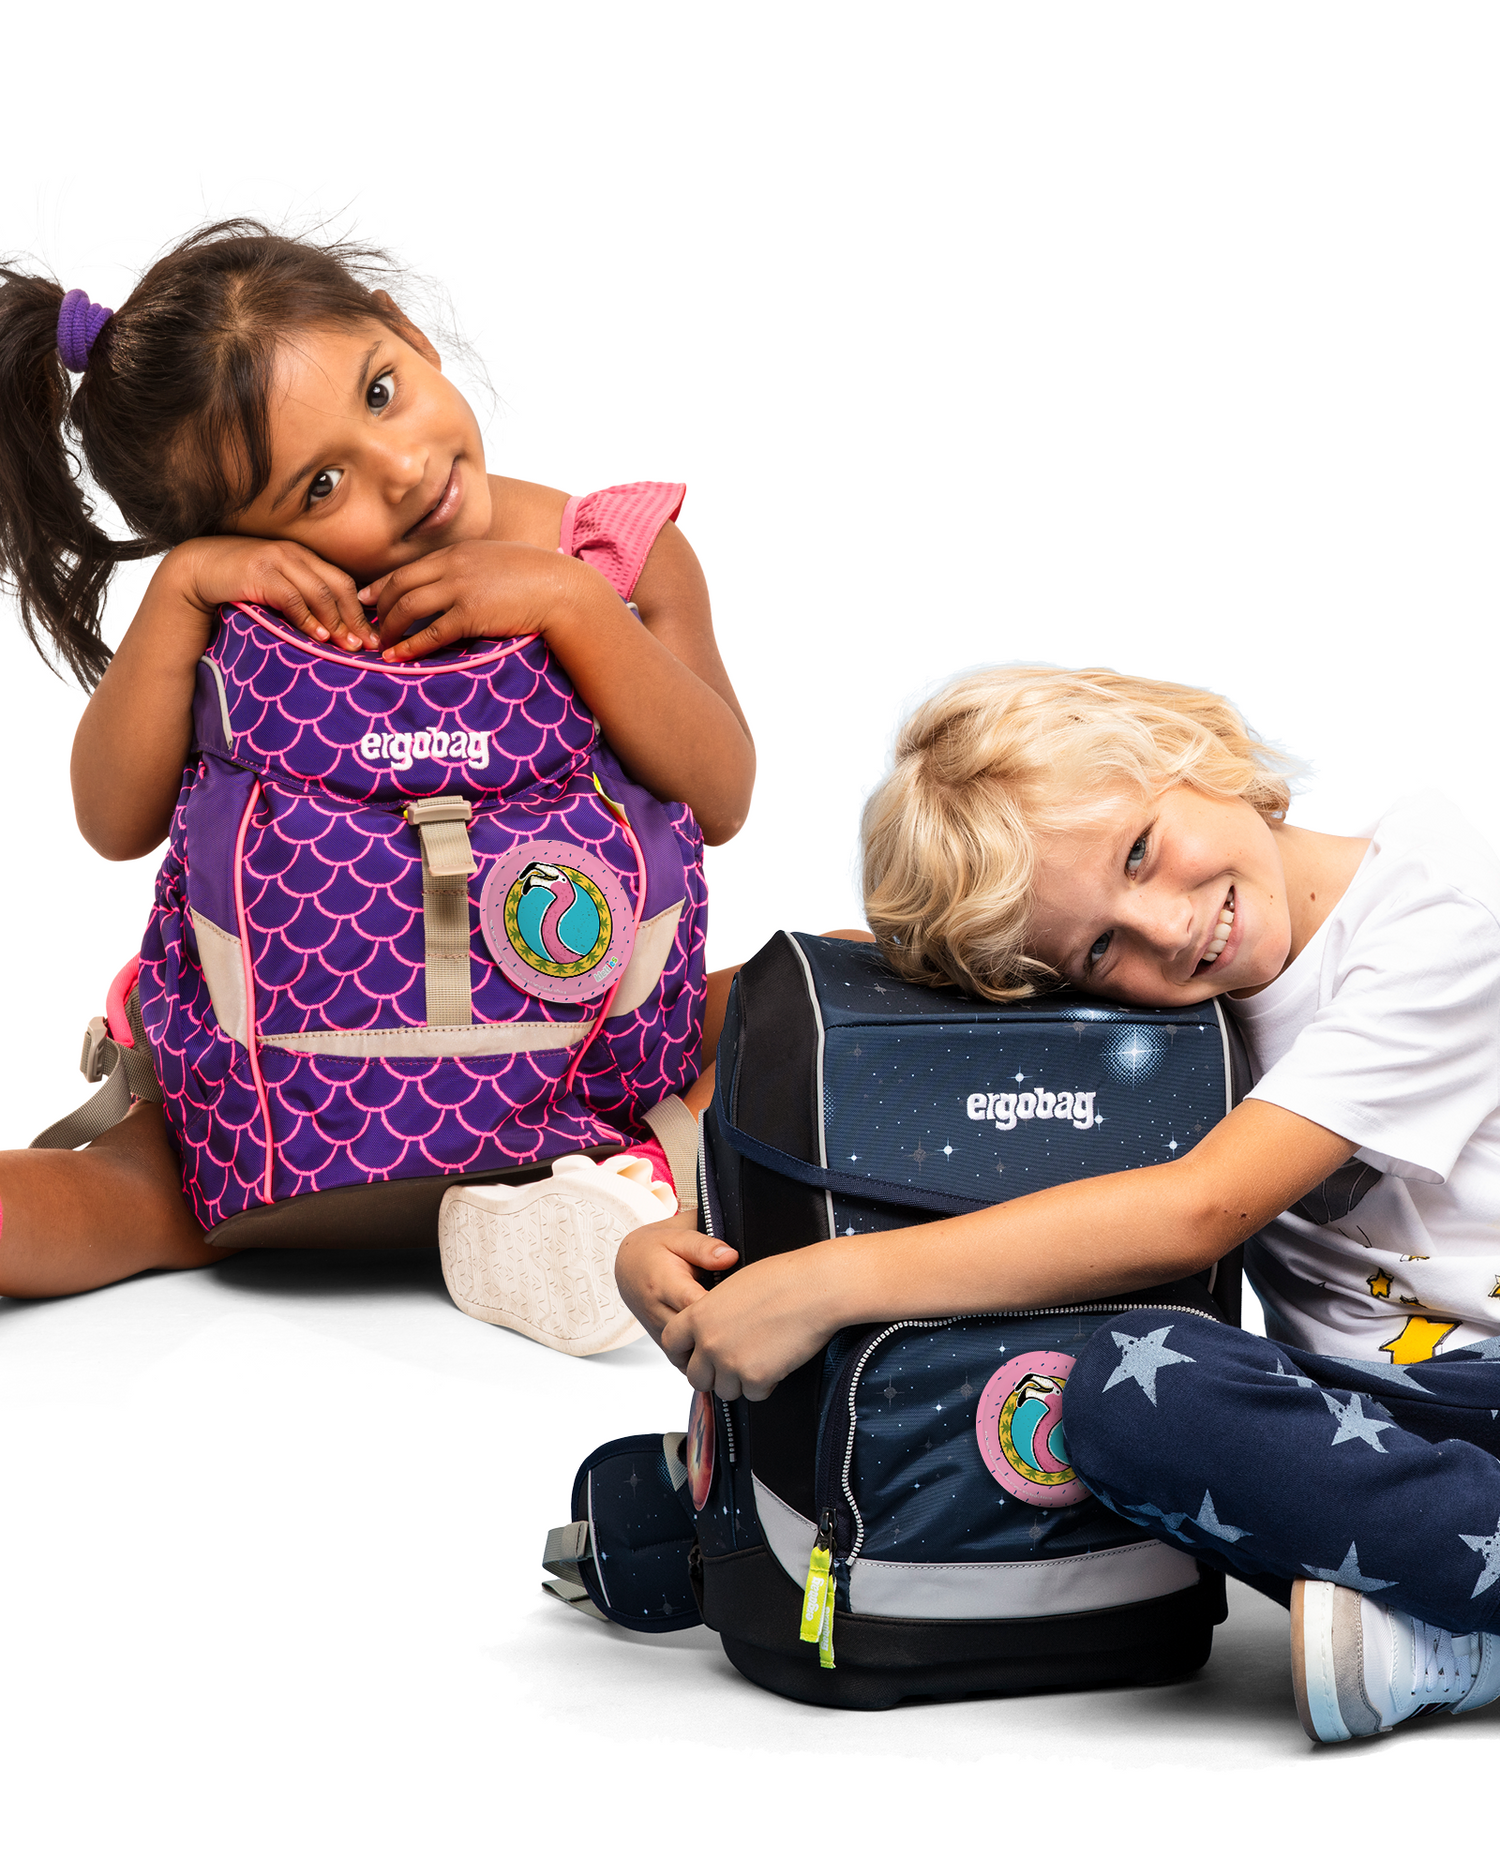 SdmT Polly Klettie: Attached to childrens ergobag backpack